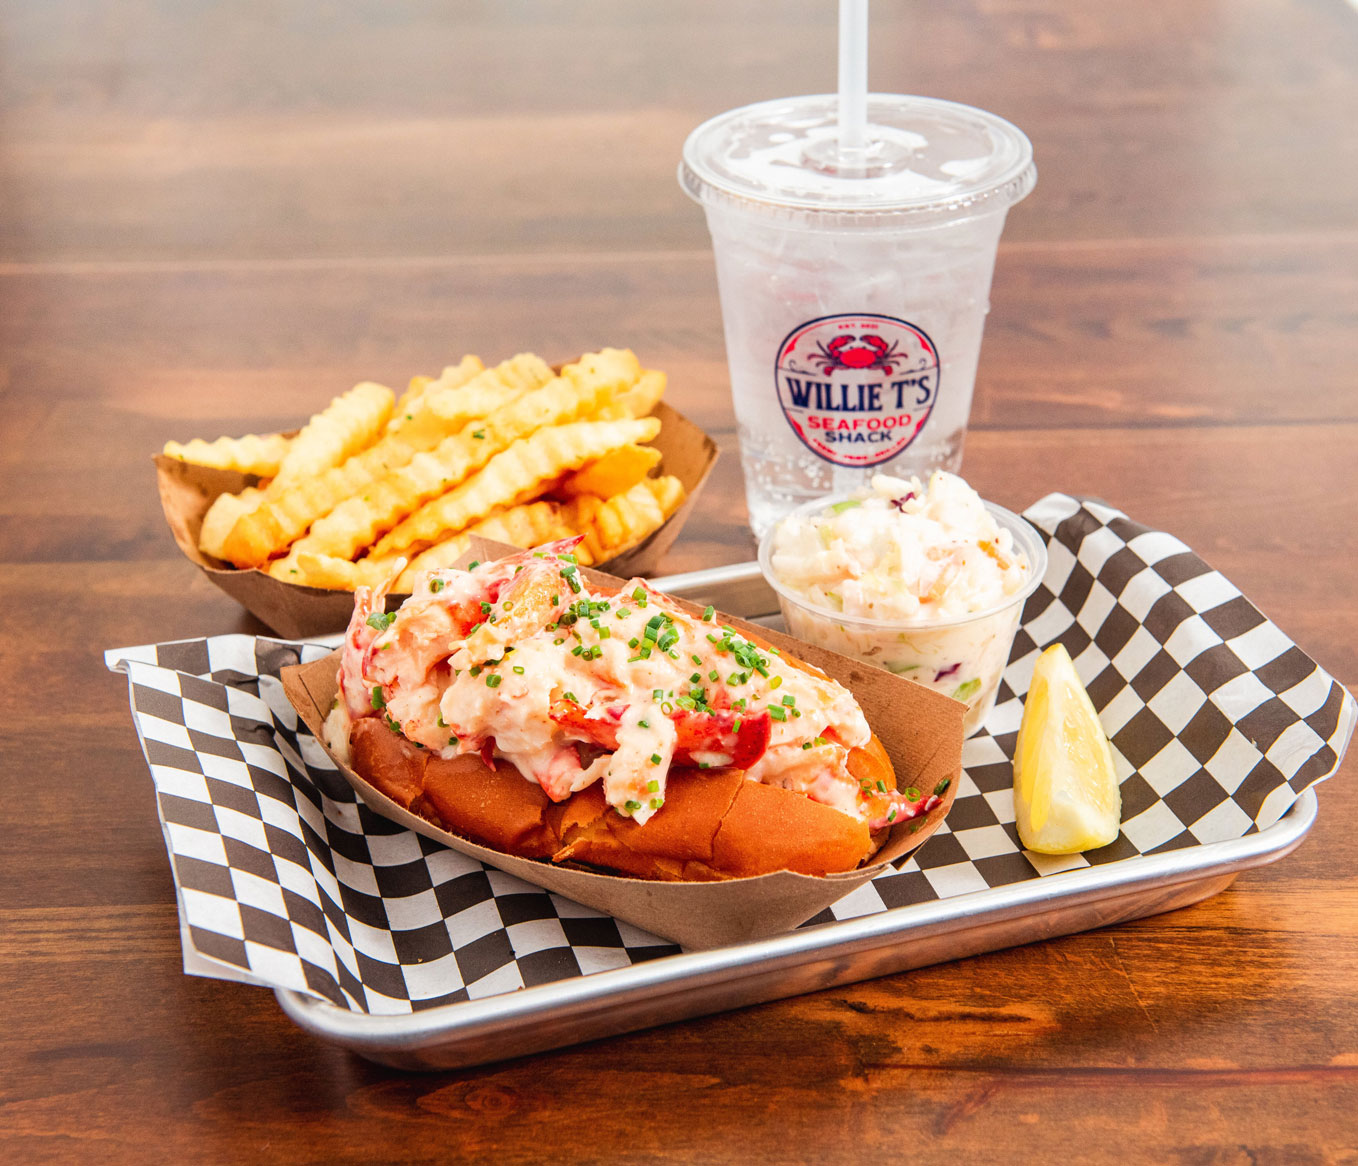 Lobster Roll from Willie T's Seafood Shack